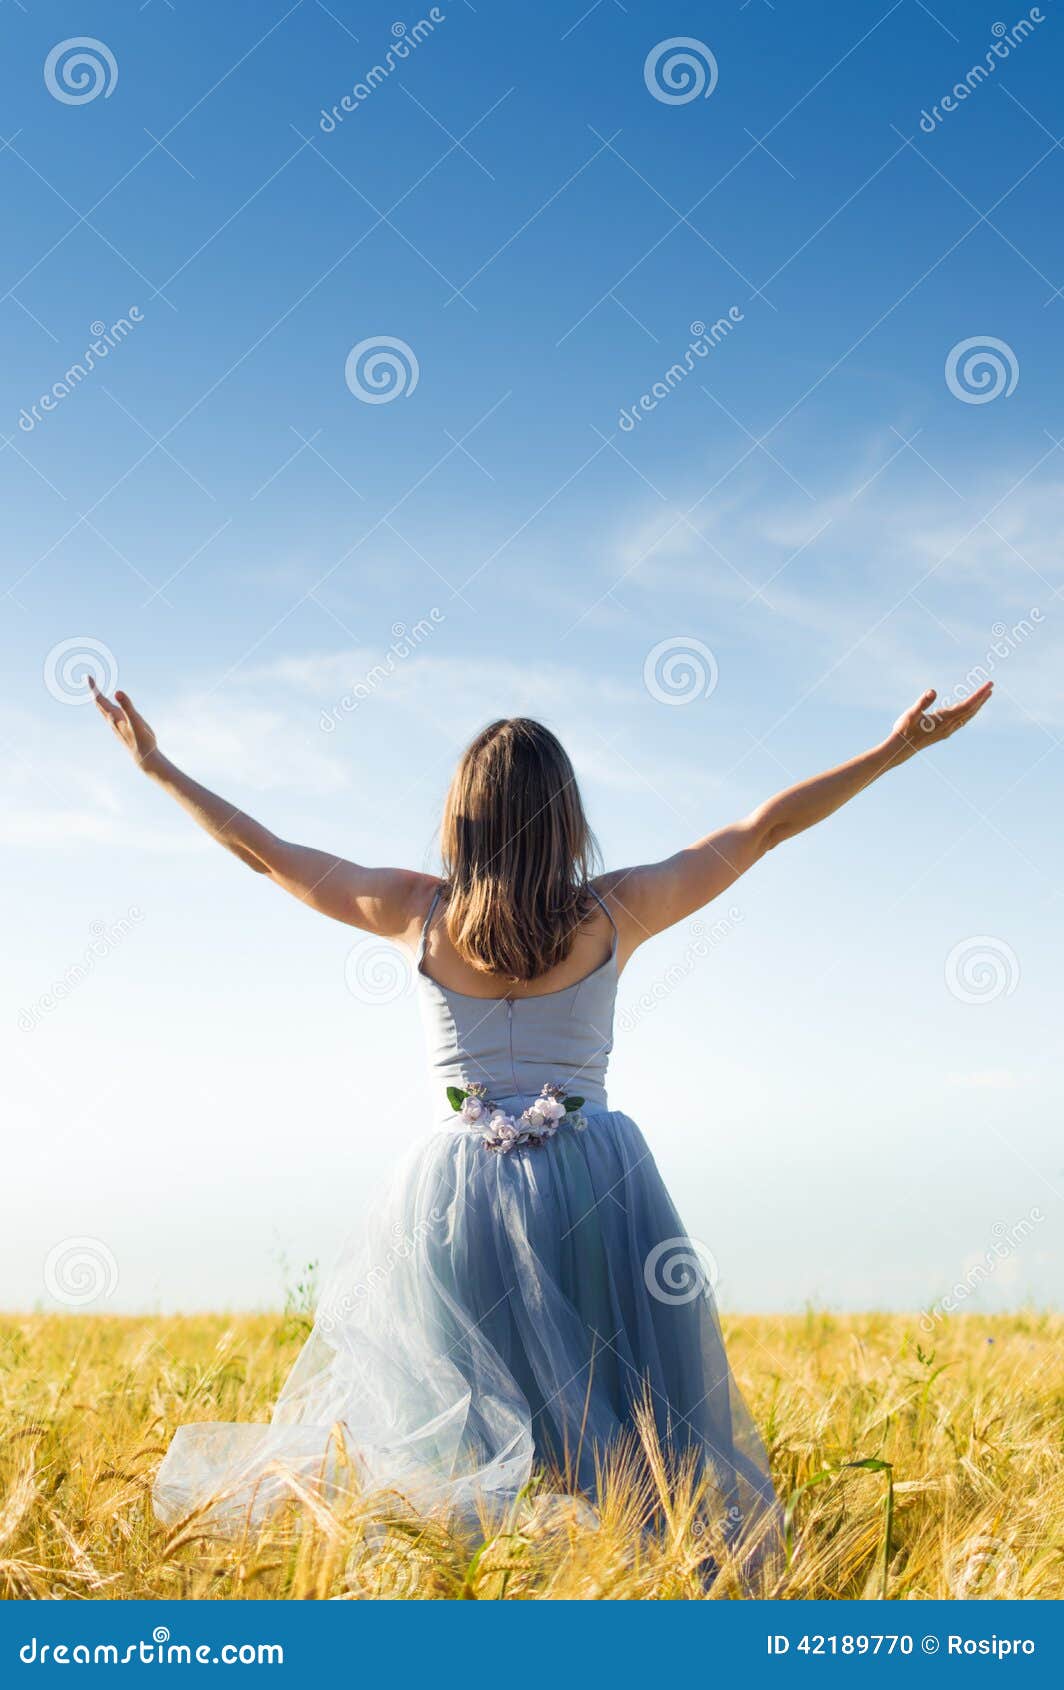 image of beautiful blond young woman wearing long blue ball dress with arms wide expand looking up on wheat field and blue sky